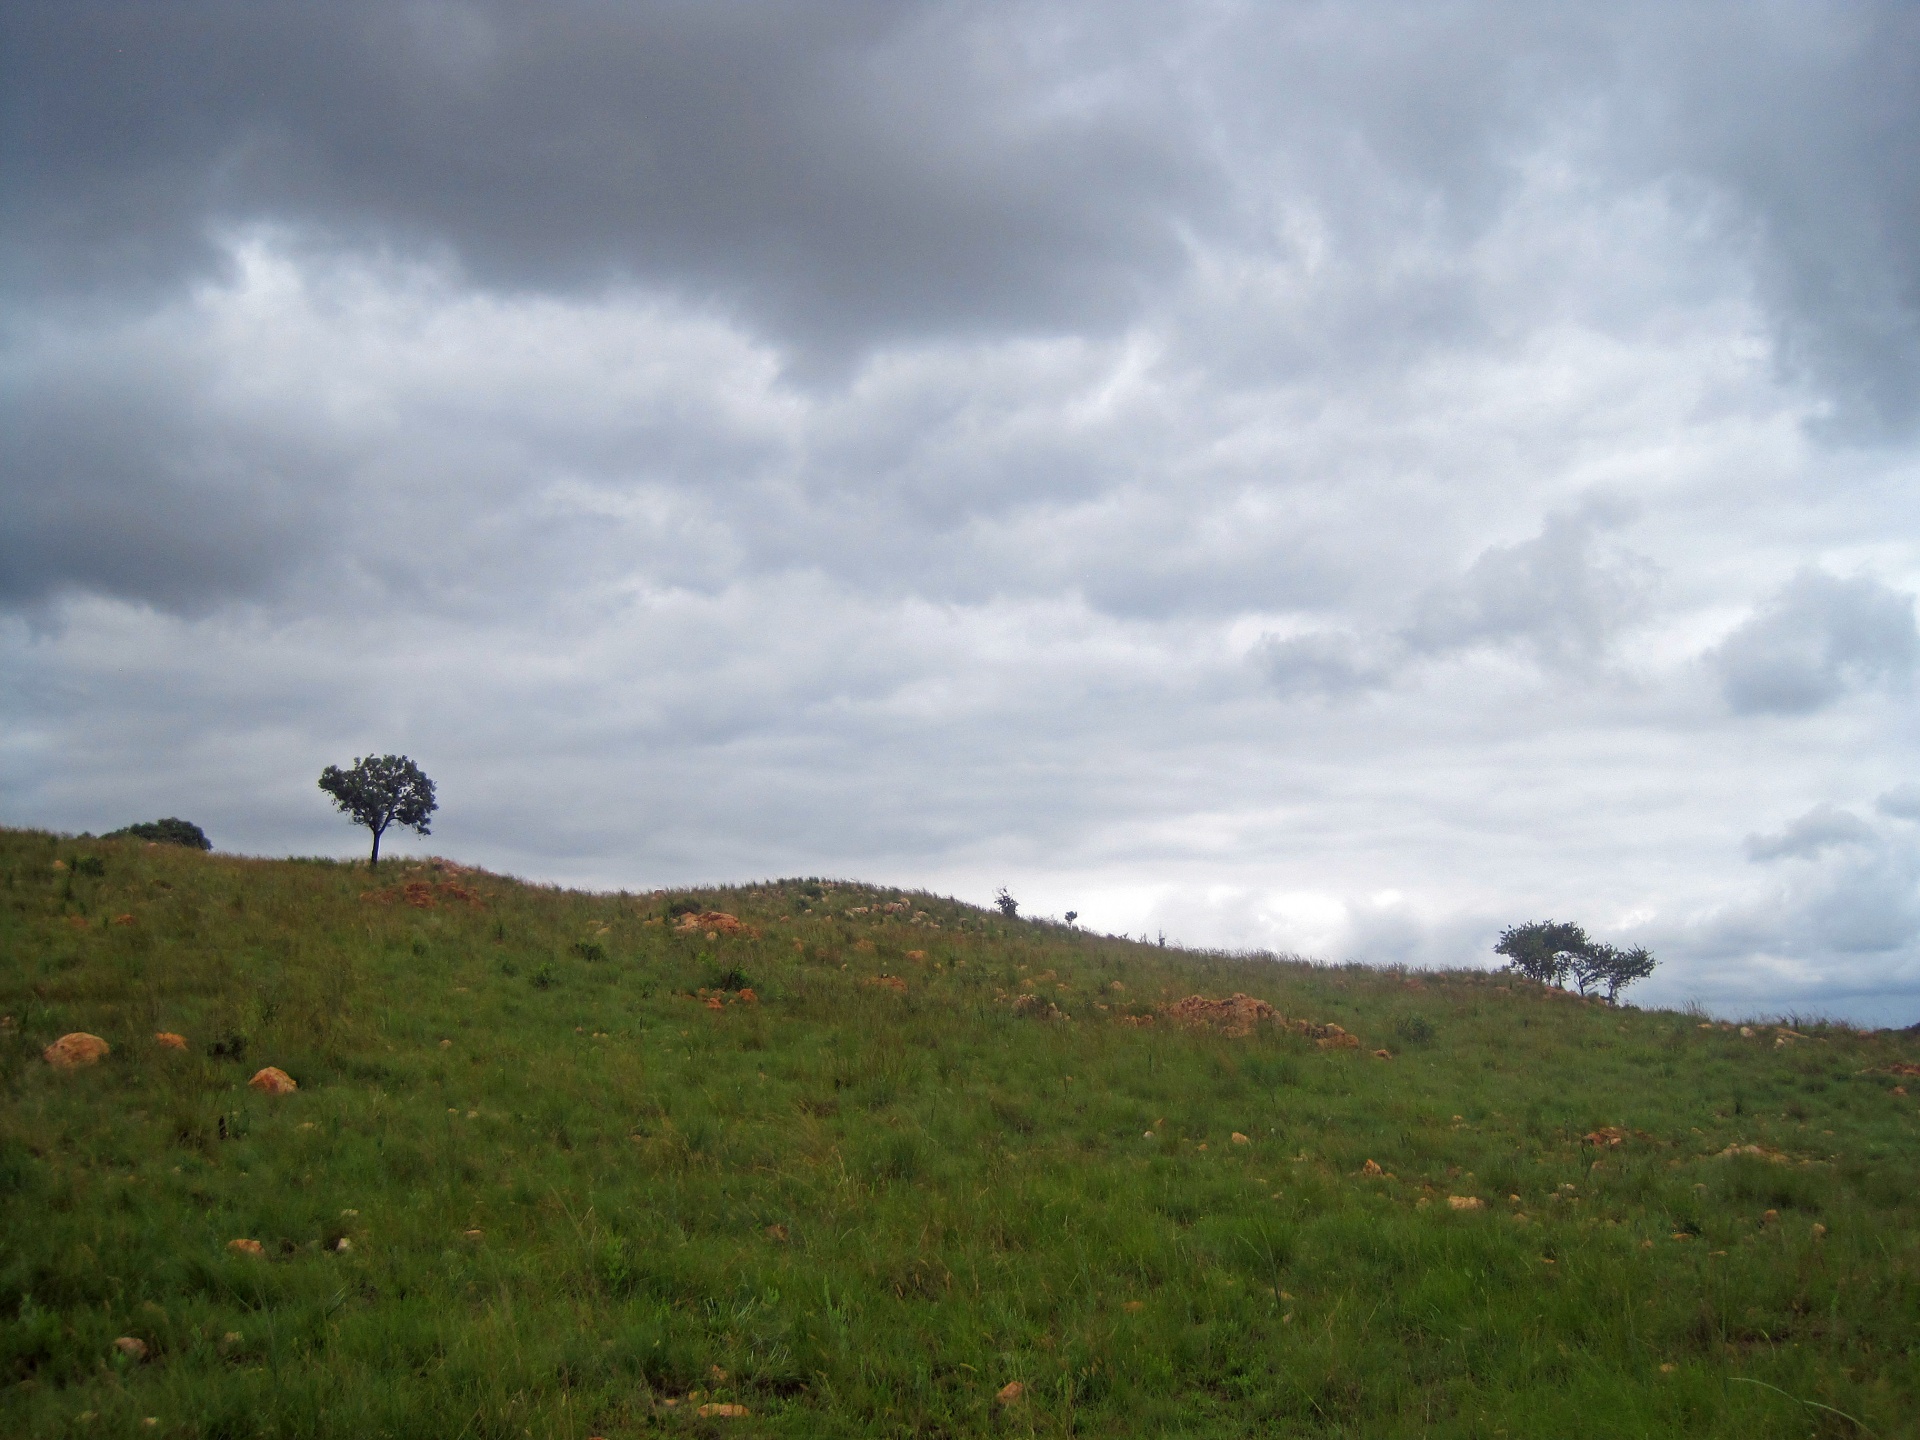 sloping hill under overcast sky in a south african landscape